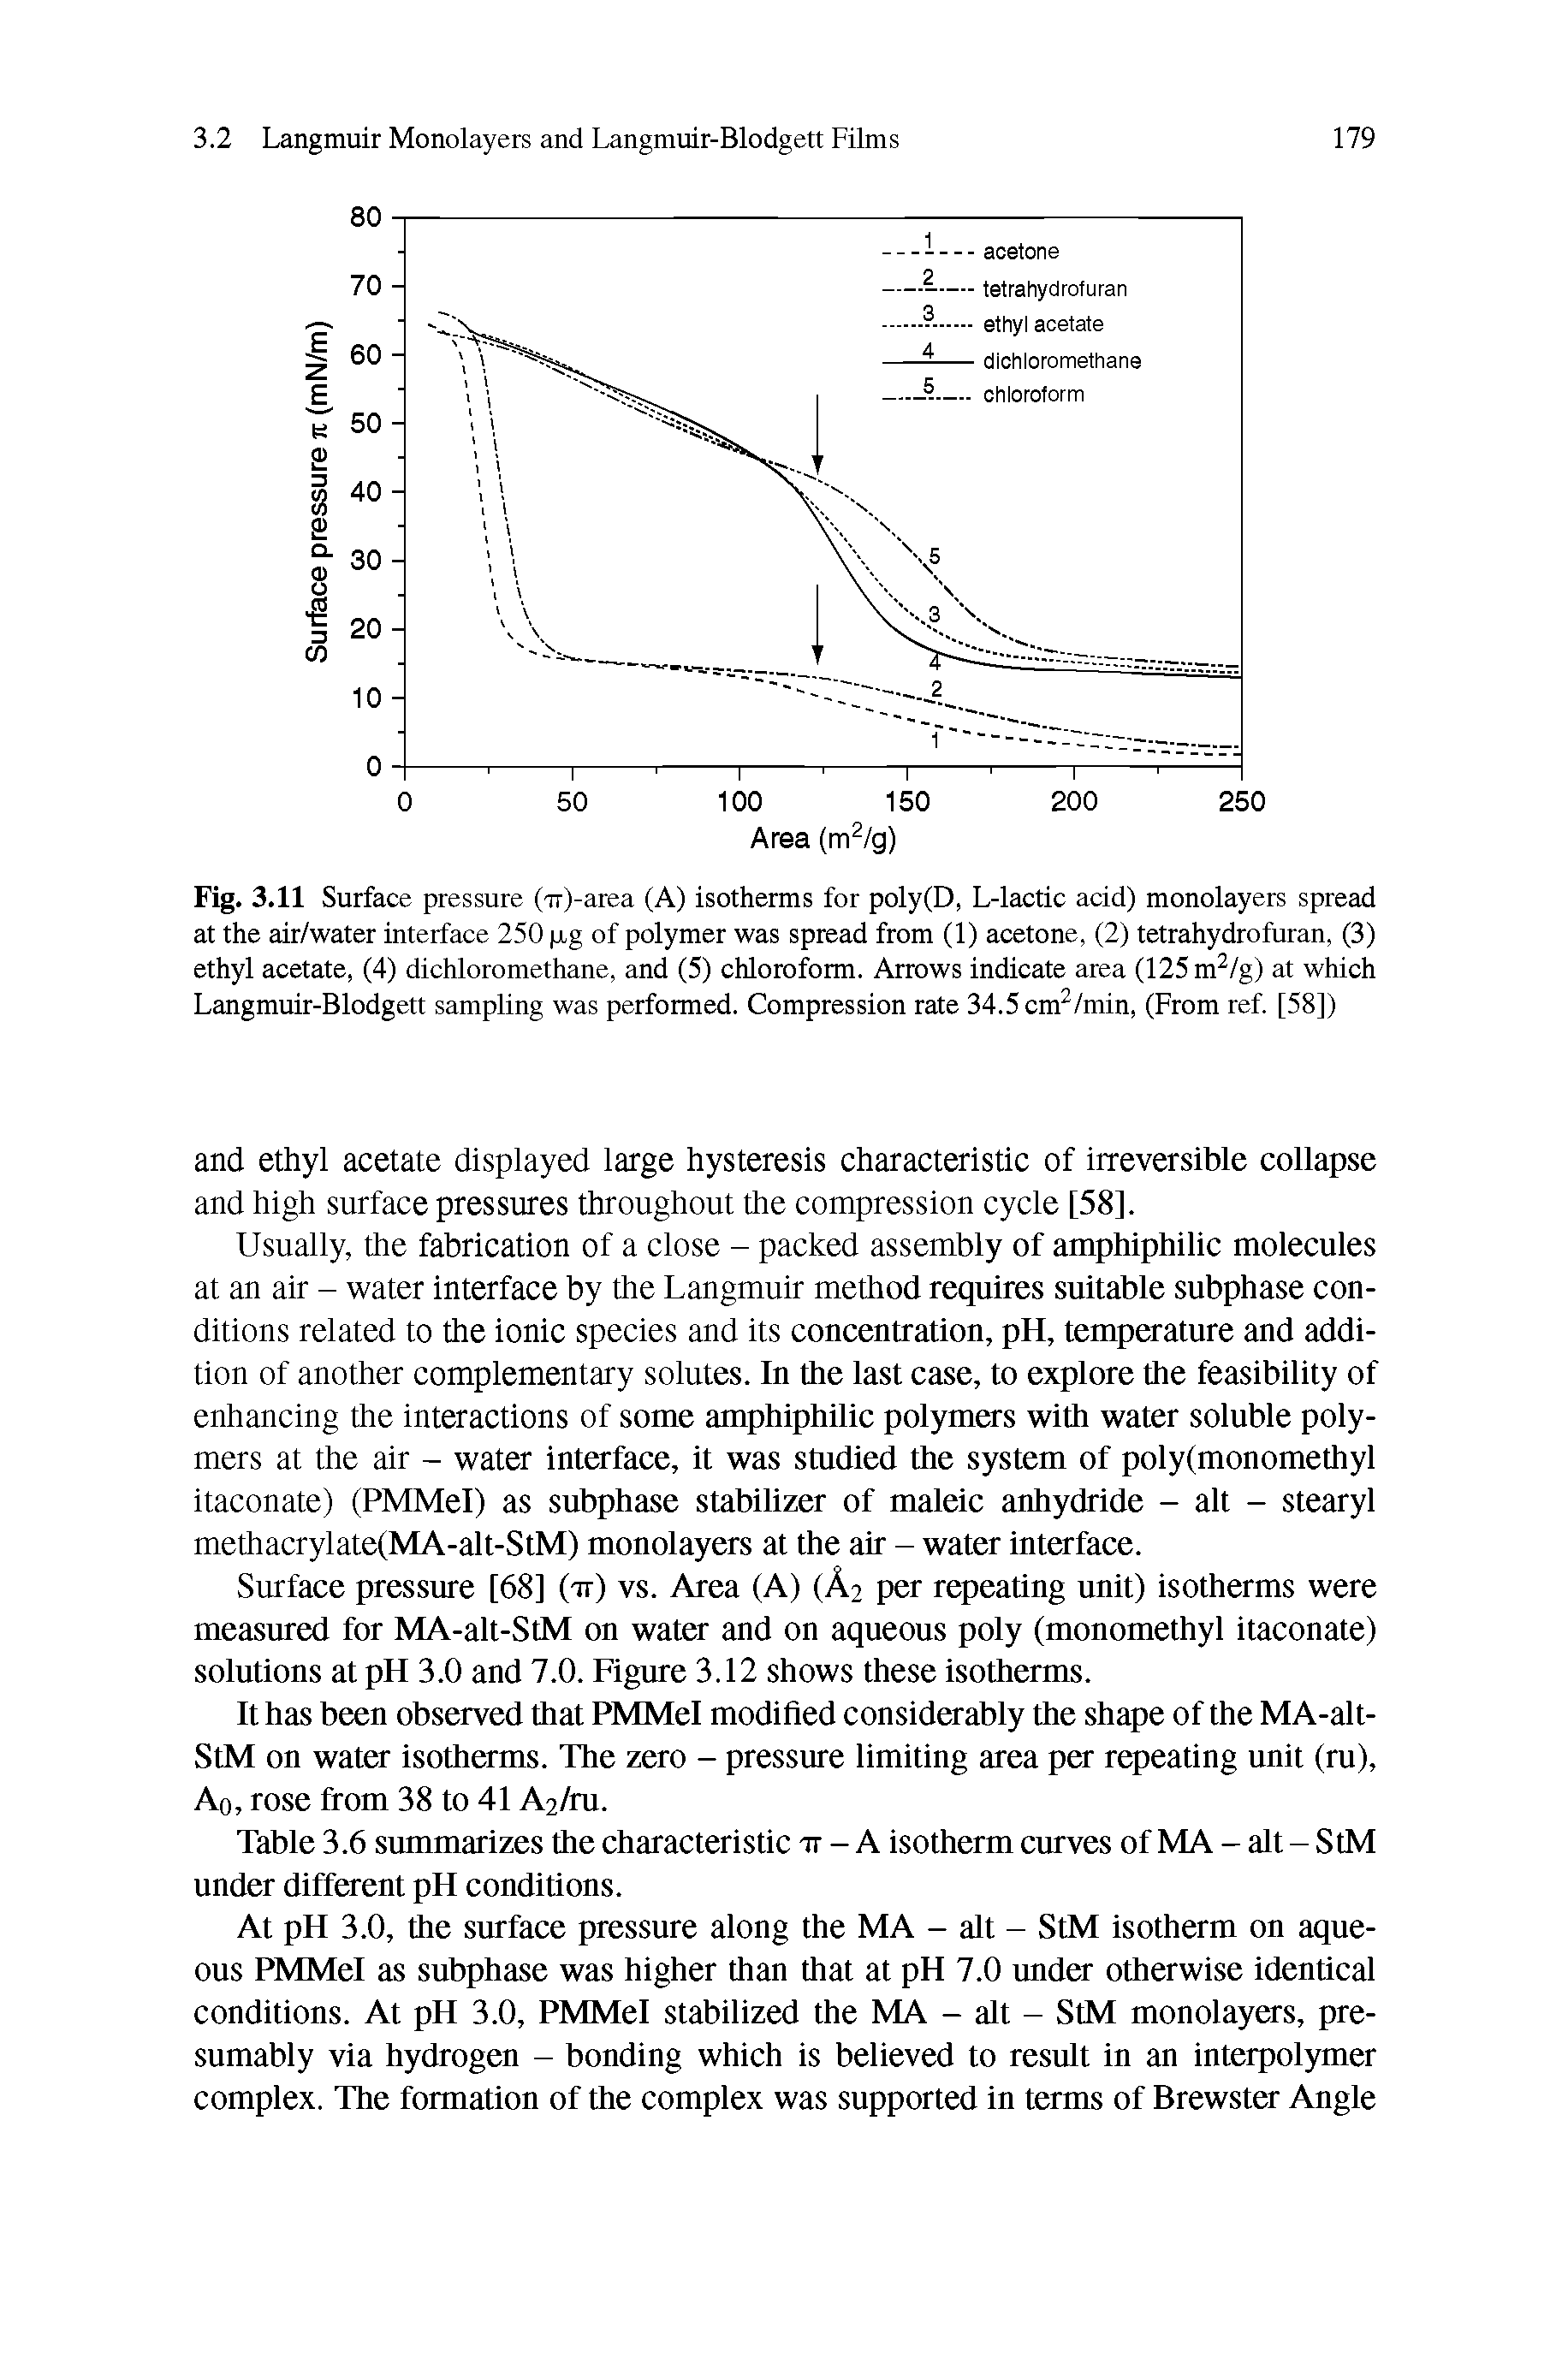 Fig. 3.11 Surface pressure (Tr)-area (A) isotherms for poly(D, L-lactic acid) monolayers spread at the air/water interface 250 pg of polymer was spread from (1) acetone, (2) tetrahydrofuran, (3) ethyl acetate, (4) dichloromethane, and (5) chloroform. Arrows indicate area (125m2/g) at which Langmuir-Blodgett sampling was performed. Compression rate 34.5cm2/min, (From ref. [58])...